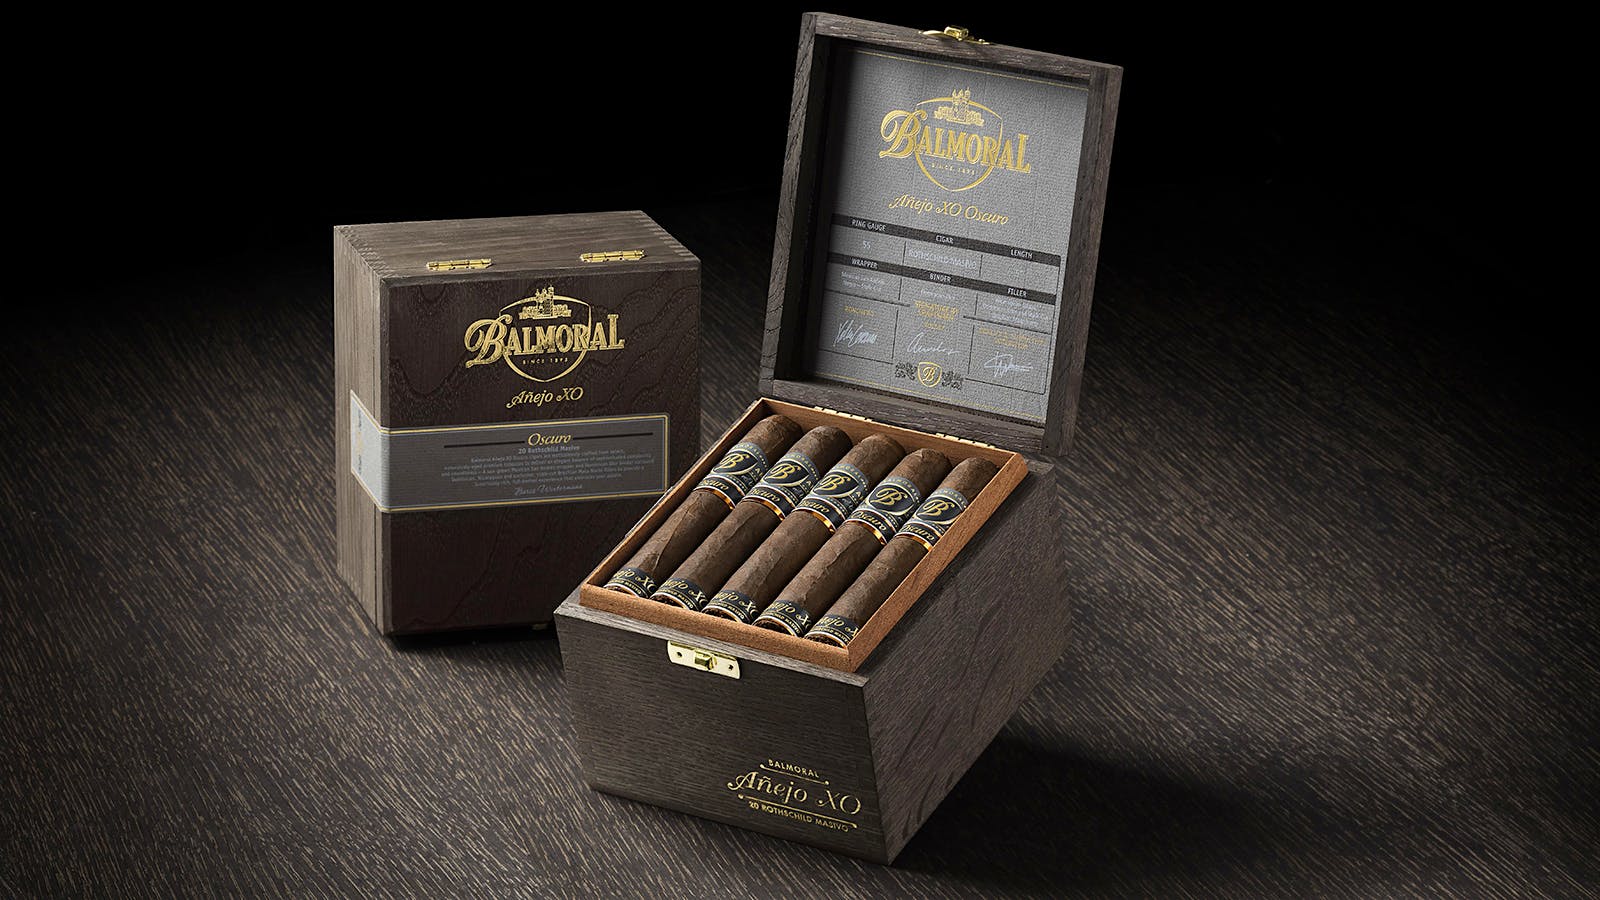 Balmoral Añejo XO Oscuro has a Mexican San Andrés wrapper, Dominican binder and filler from Nicaragua, the Dominican Republic and Brazil.